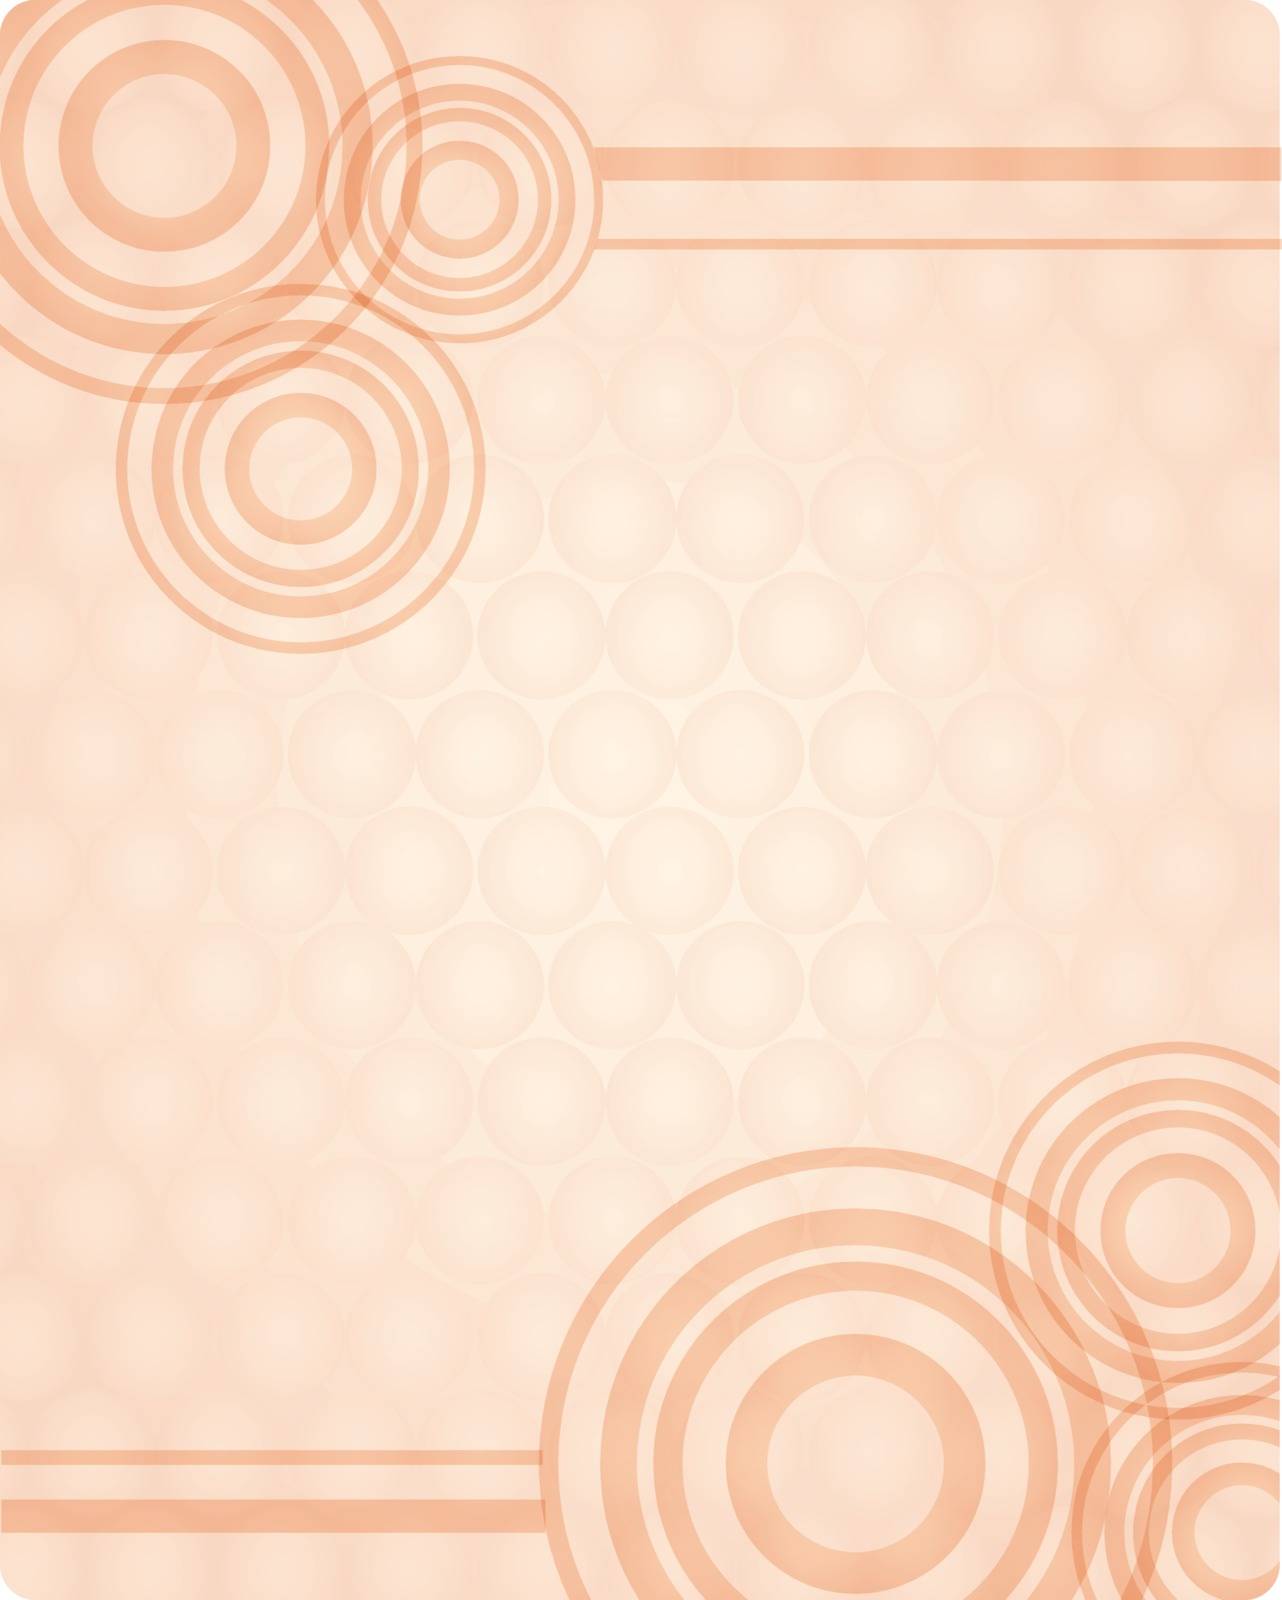 Illustration of blank template with circle rings